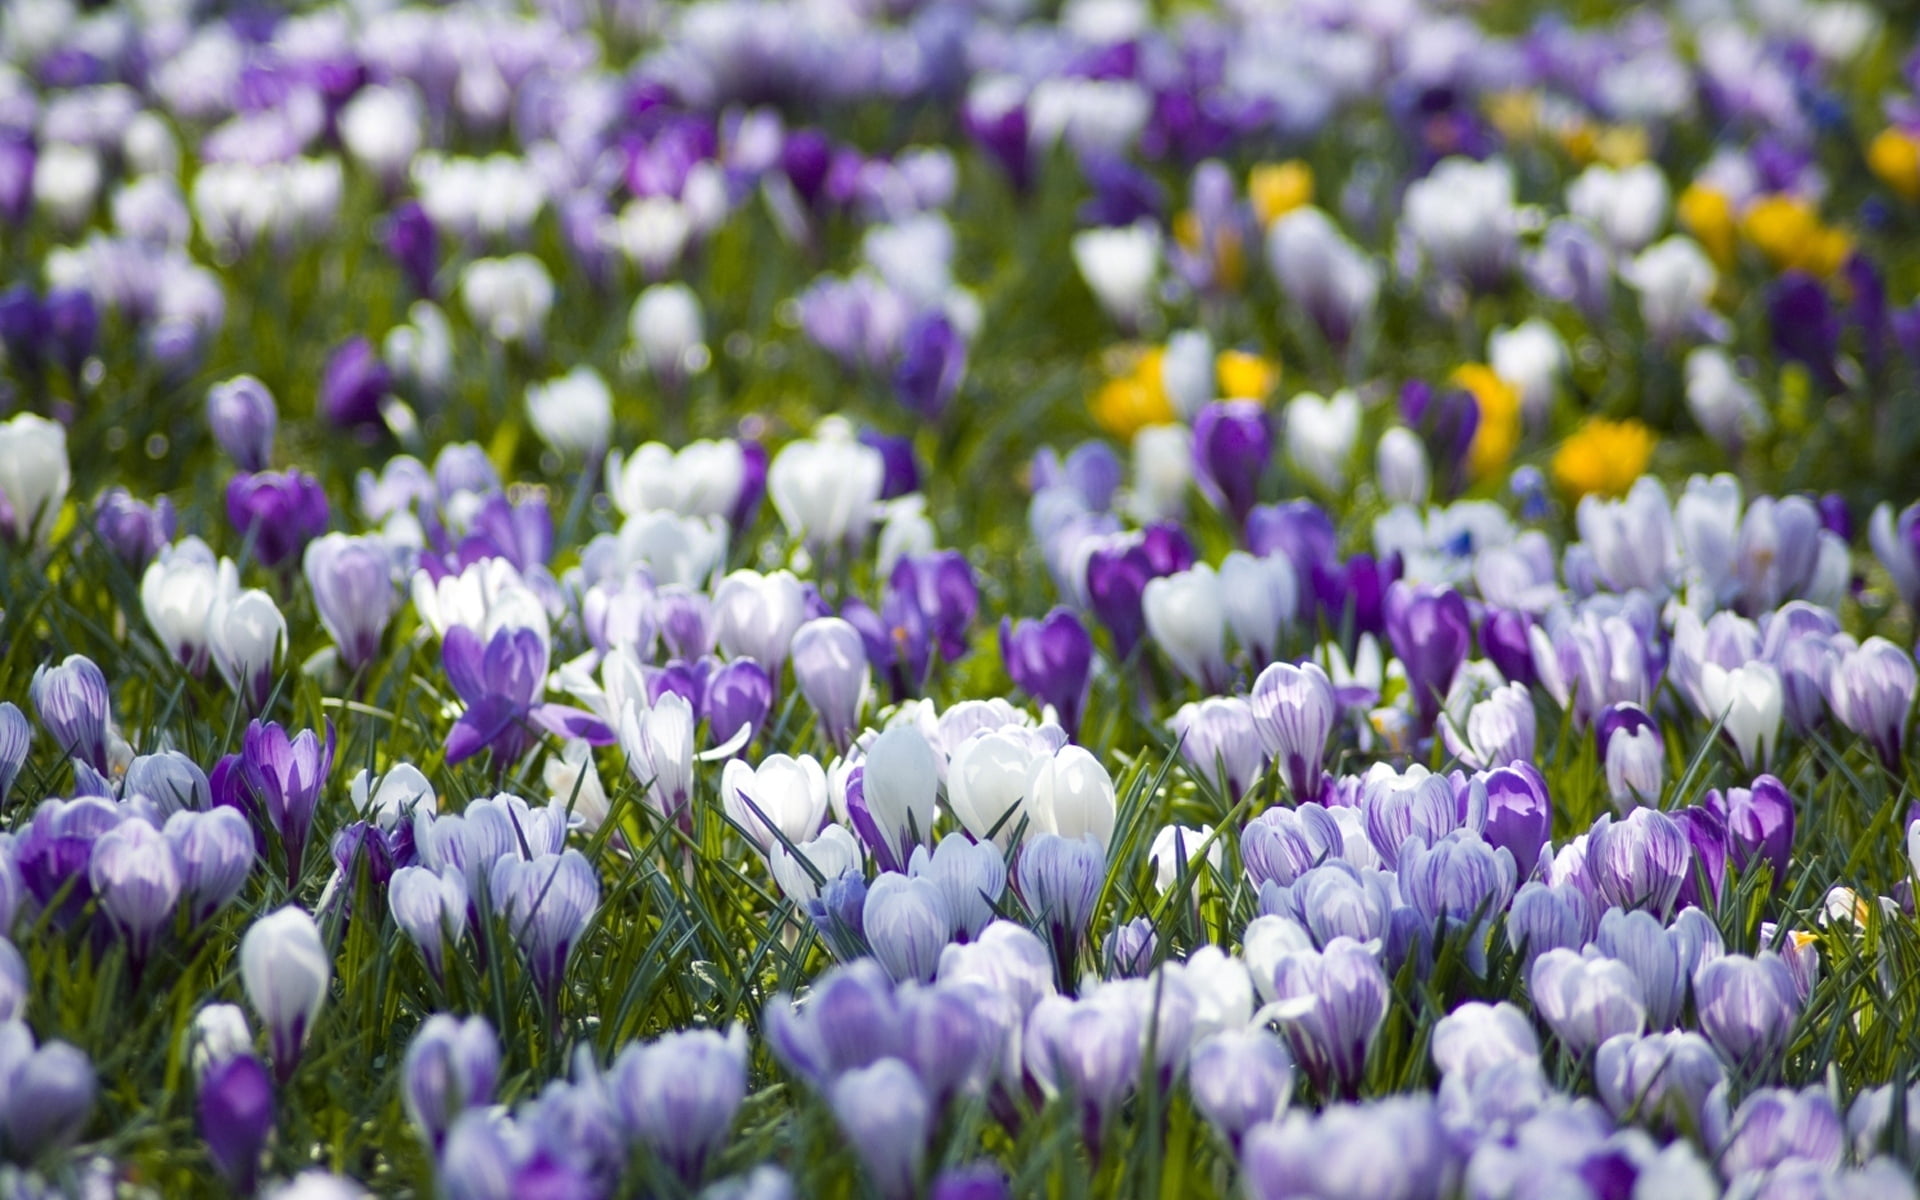 purple and white tulips, crocuses, flowers, meadow, different